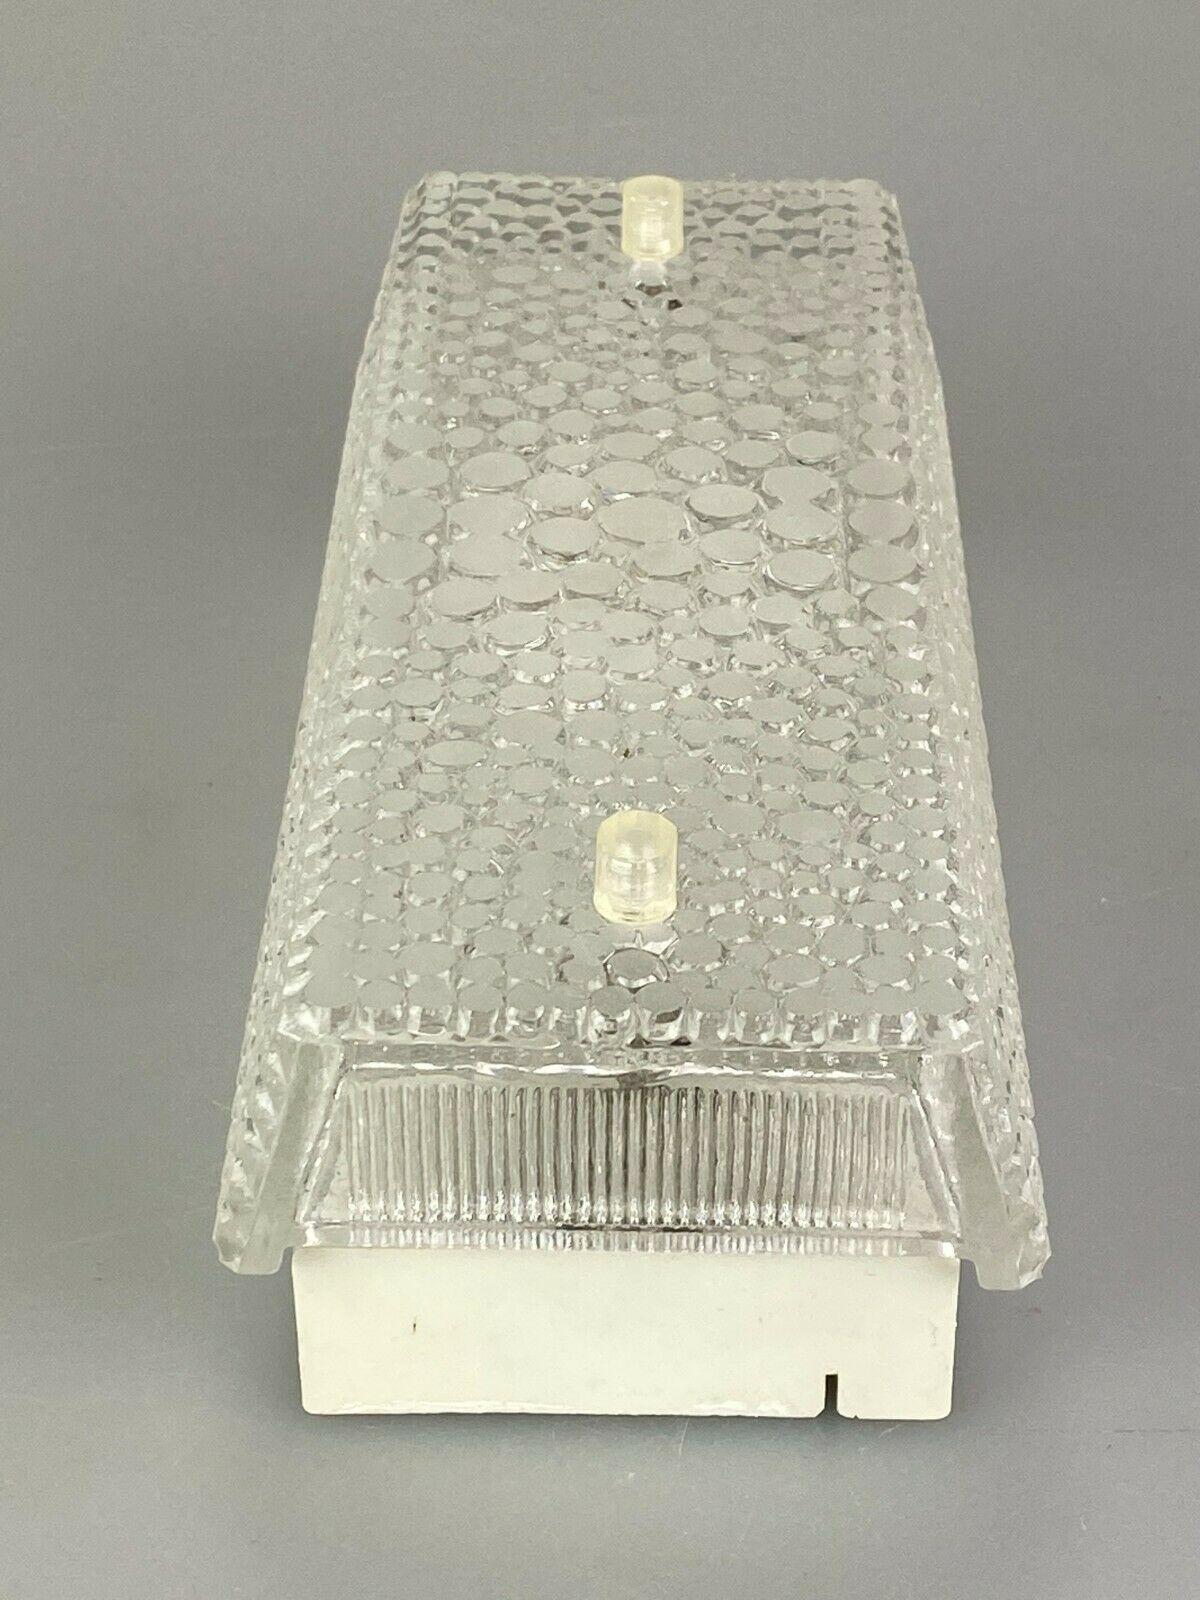 60s 70s Lamp Fixture Wall Sconce Wall Lamp Ice Glass Space Age Design For Sale 2